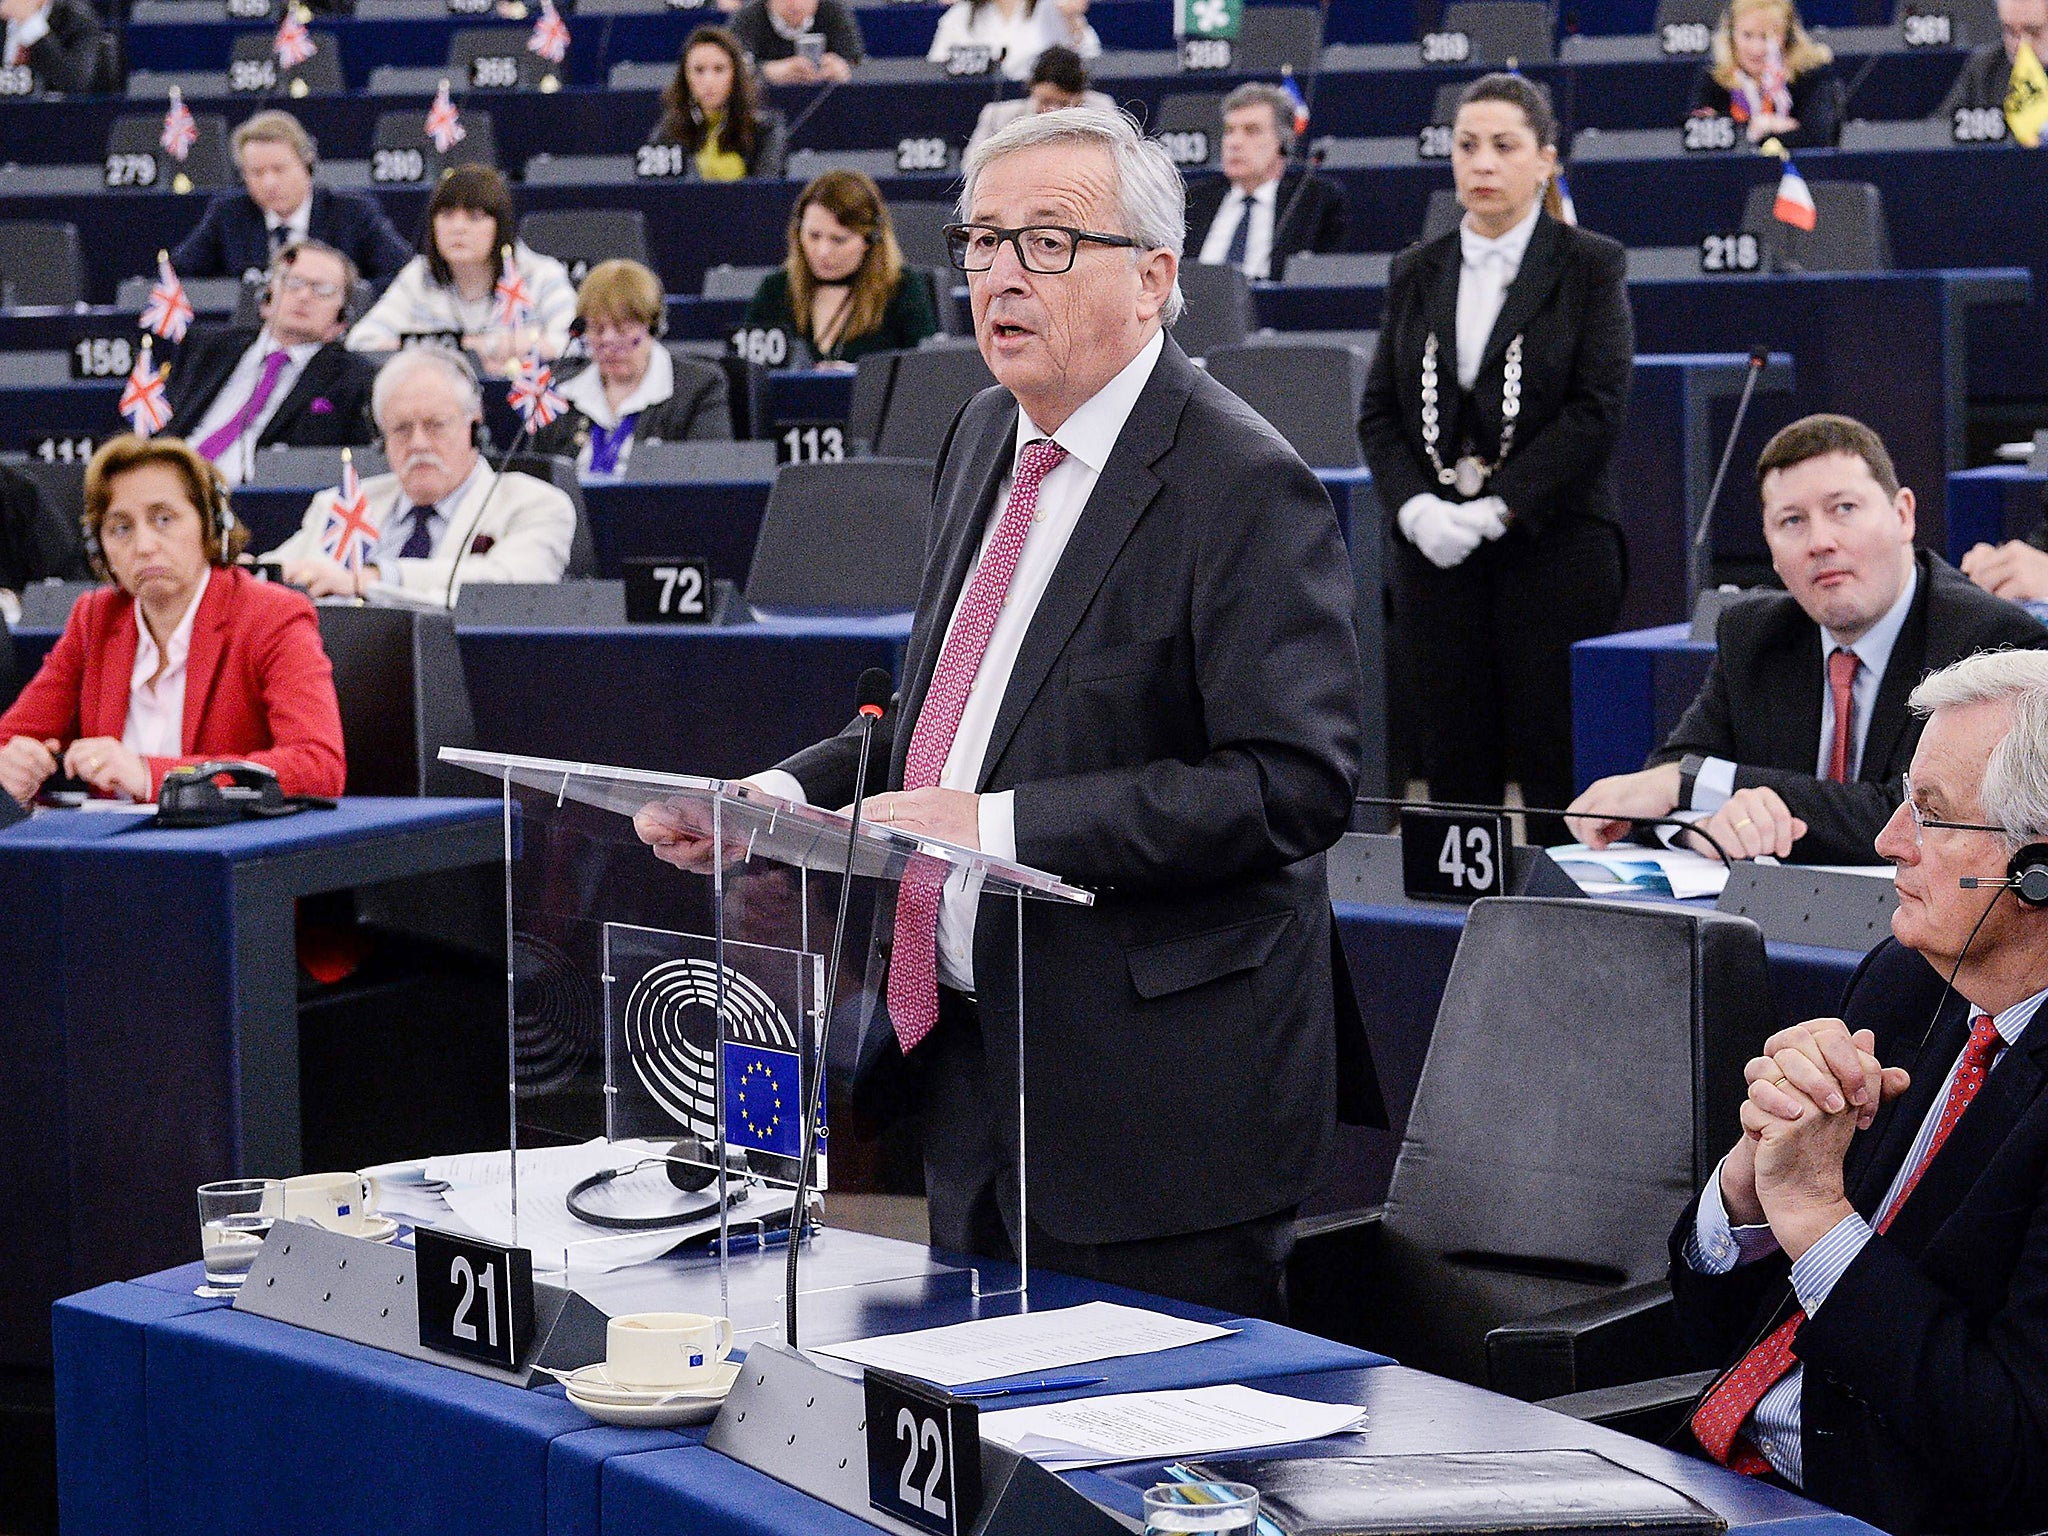 &#13;
Michel Barnier listens as the President of the European Commission Jean-Claude Juncker speaks at the European Parliament in Strasbourg &#13;